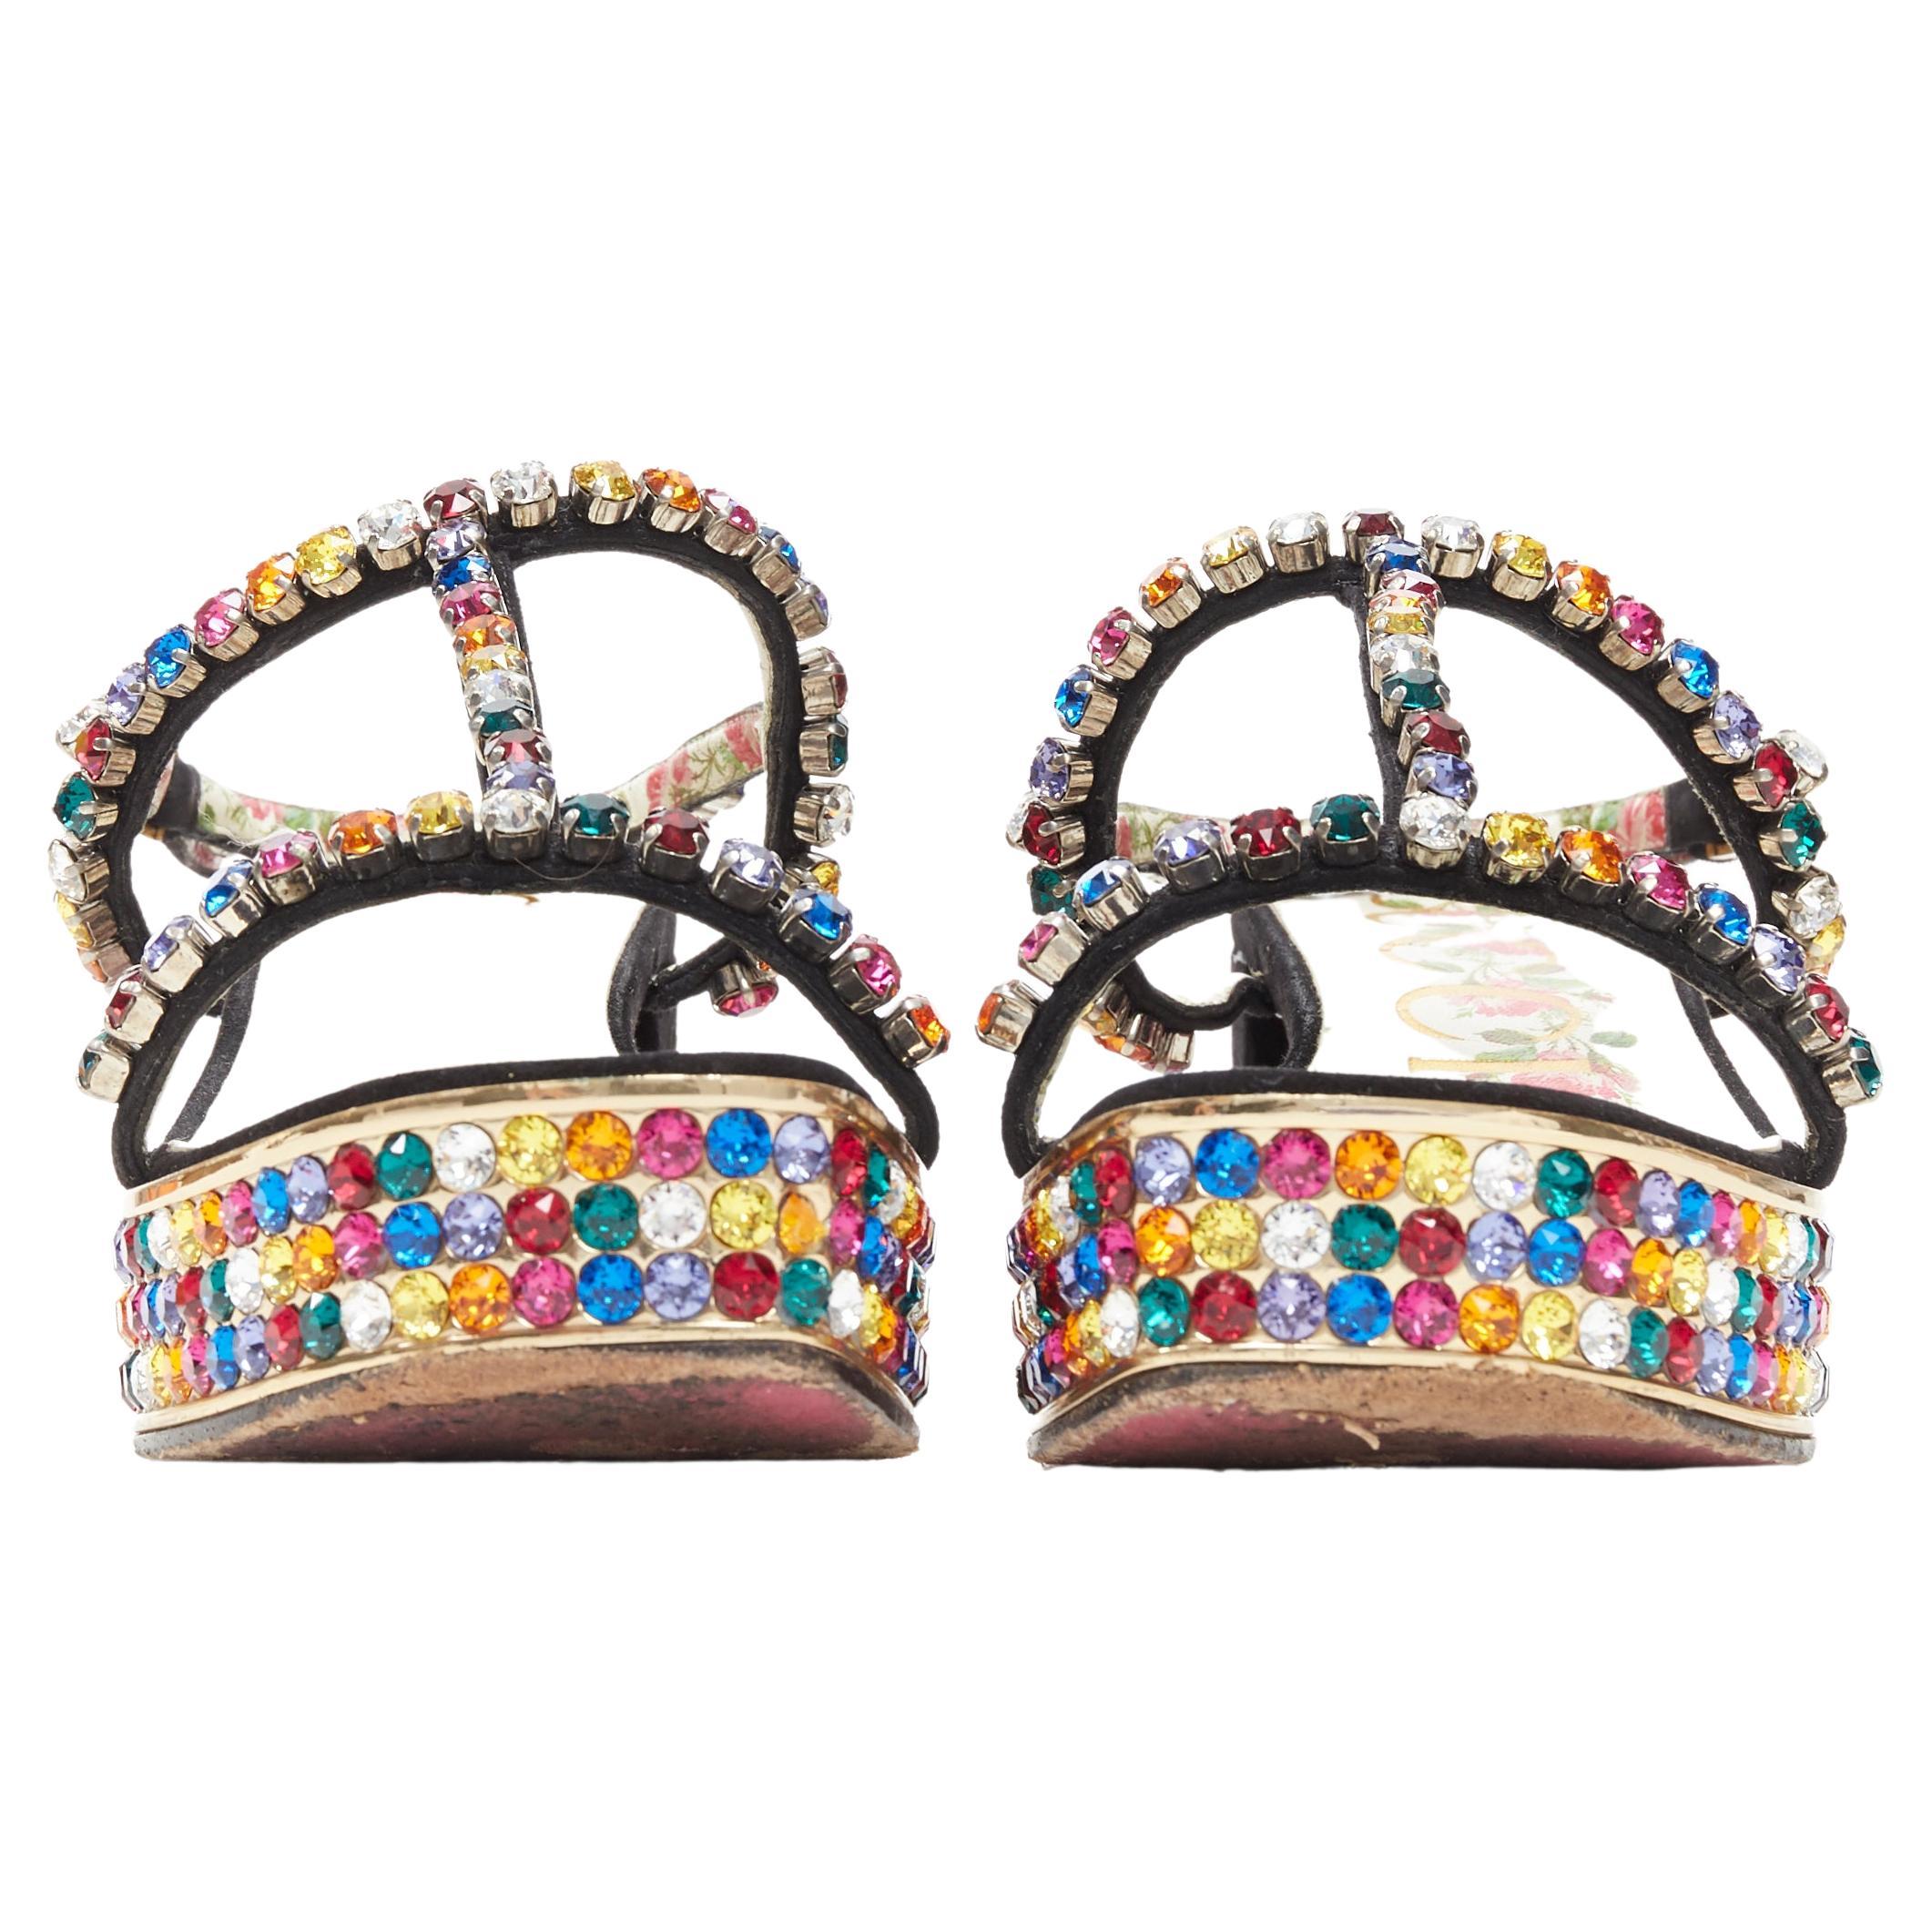 GUCCI Michele Mira rainbow jewel strass crystal block heel T-strap sandal EU35.5 
Reference: TGAS/A04250 
Brand: Gucci 
Designer: Alessandro Michele 
Model: Mira sandal 
Material: Suede 
Color: Multicolour 
Pattern: Solid 
Closure: Ankle Strap 
Made